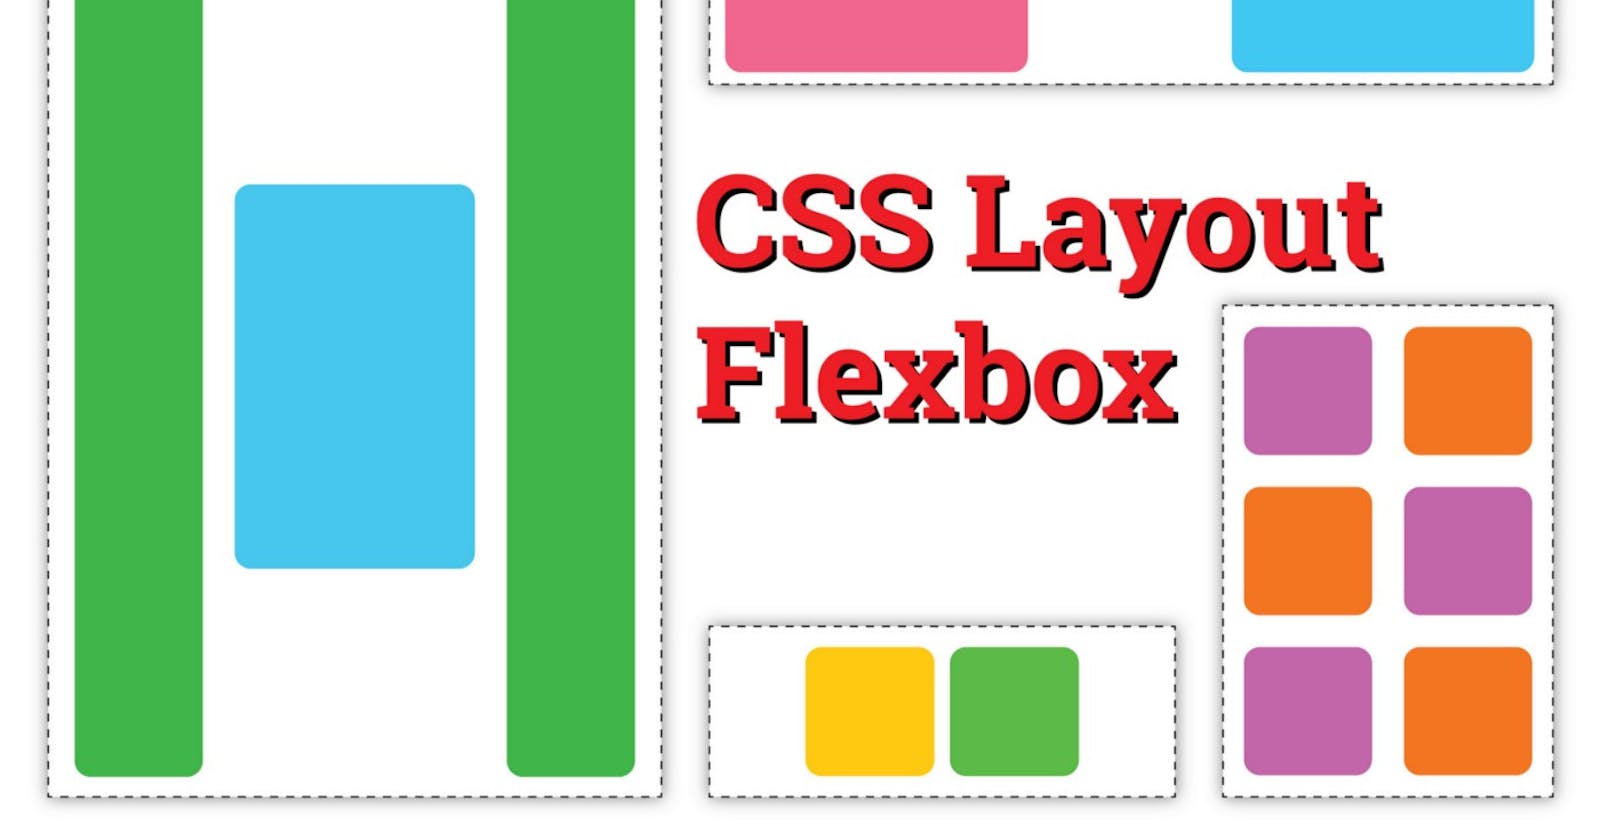 What is flexbox